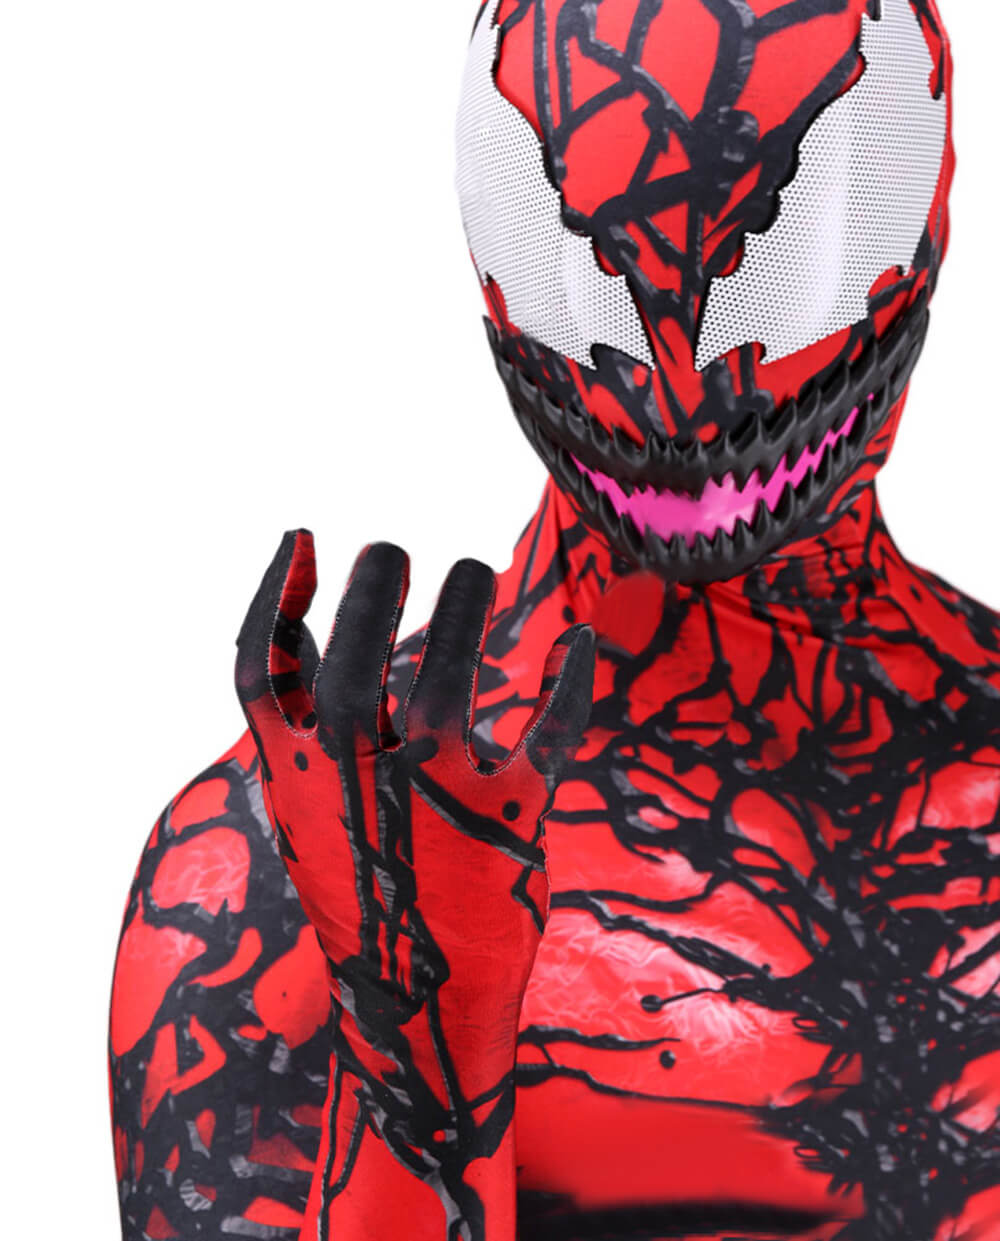 Venom 2: Let There Be Carnage Cletus Kasady Cosplay Costume Upgrade ...